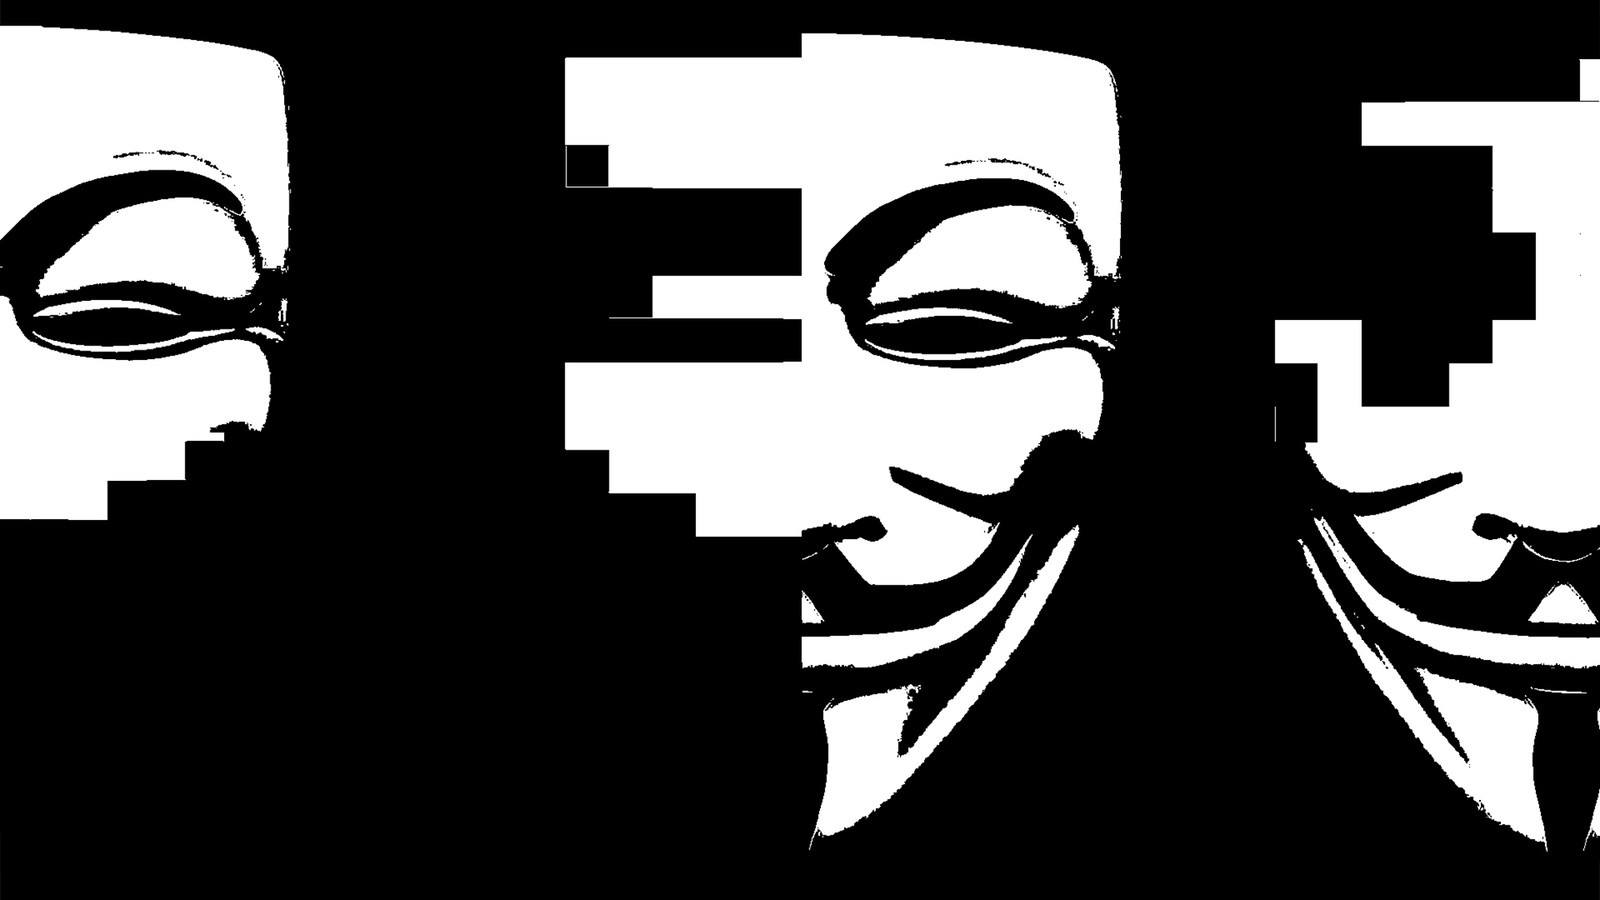 Anonymous Hacker Caught By Police Artistic Wallpapers